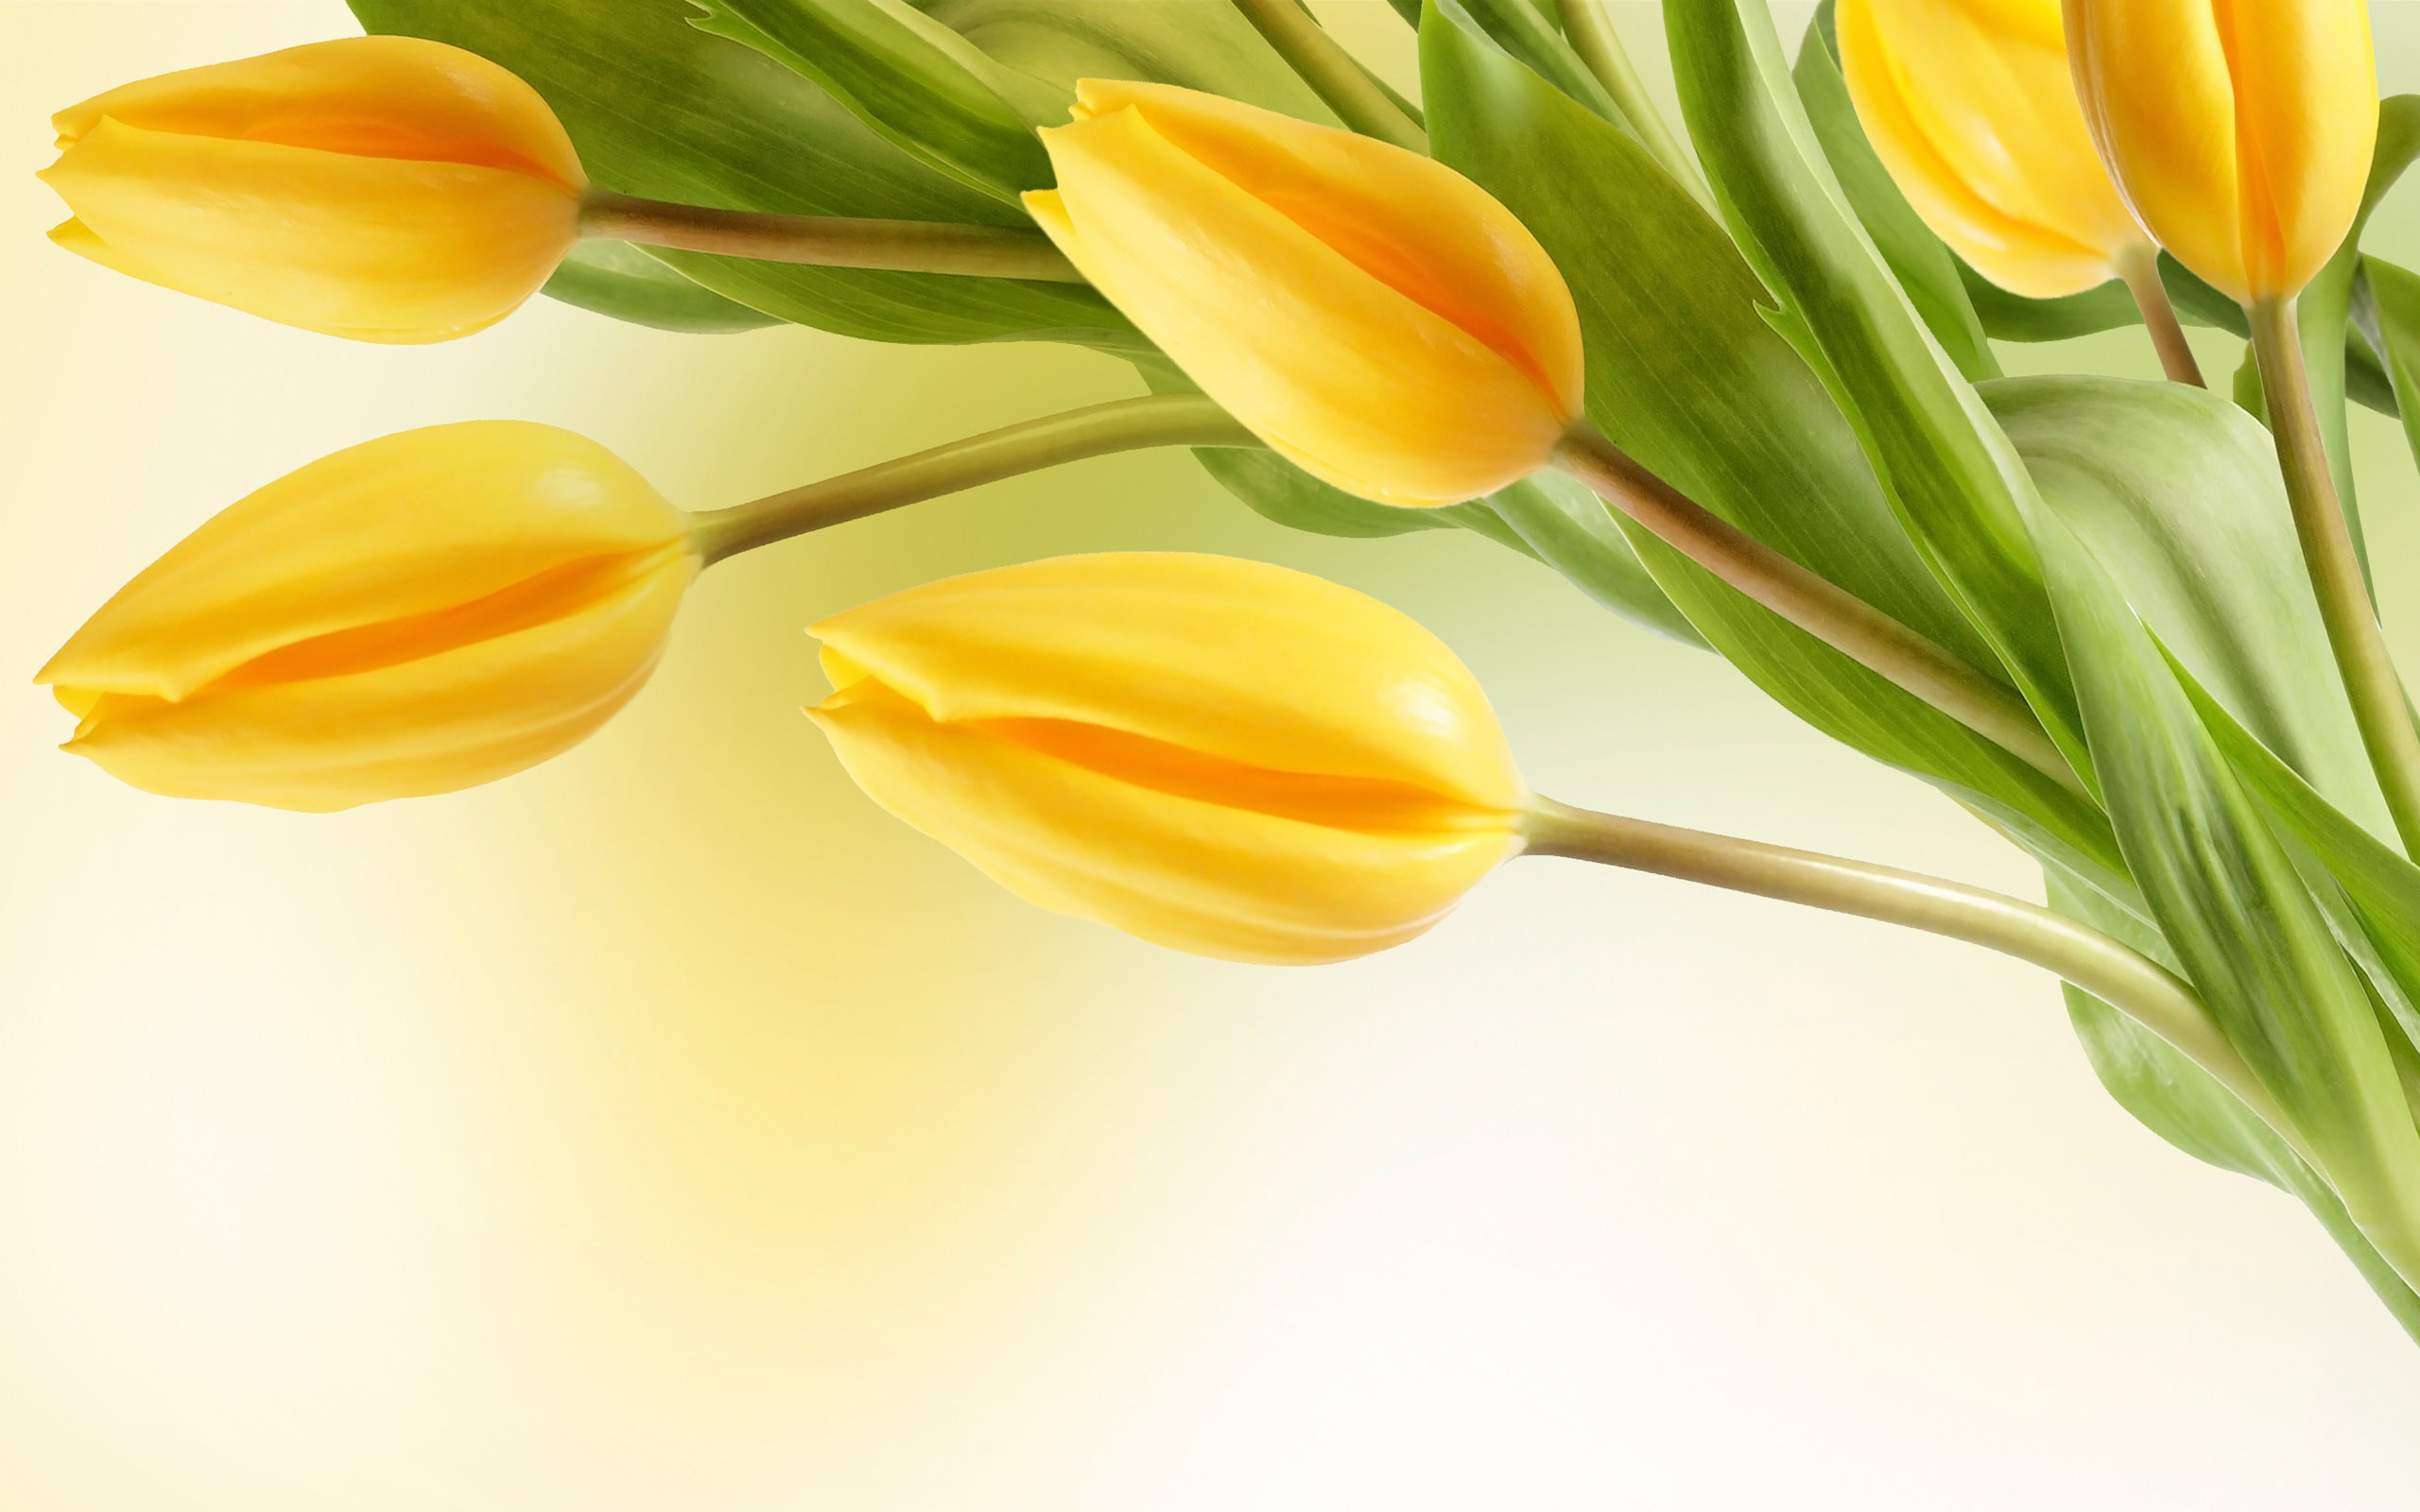 Large Tulip Picture - Yellow Tulips Wallpaper Hd - HD Wallpaper 